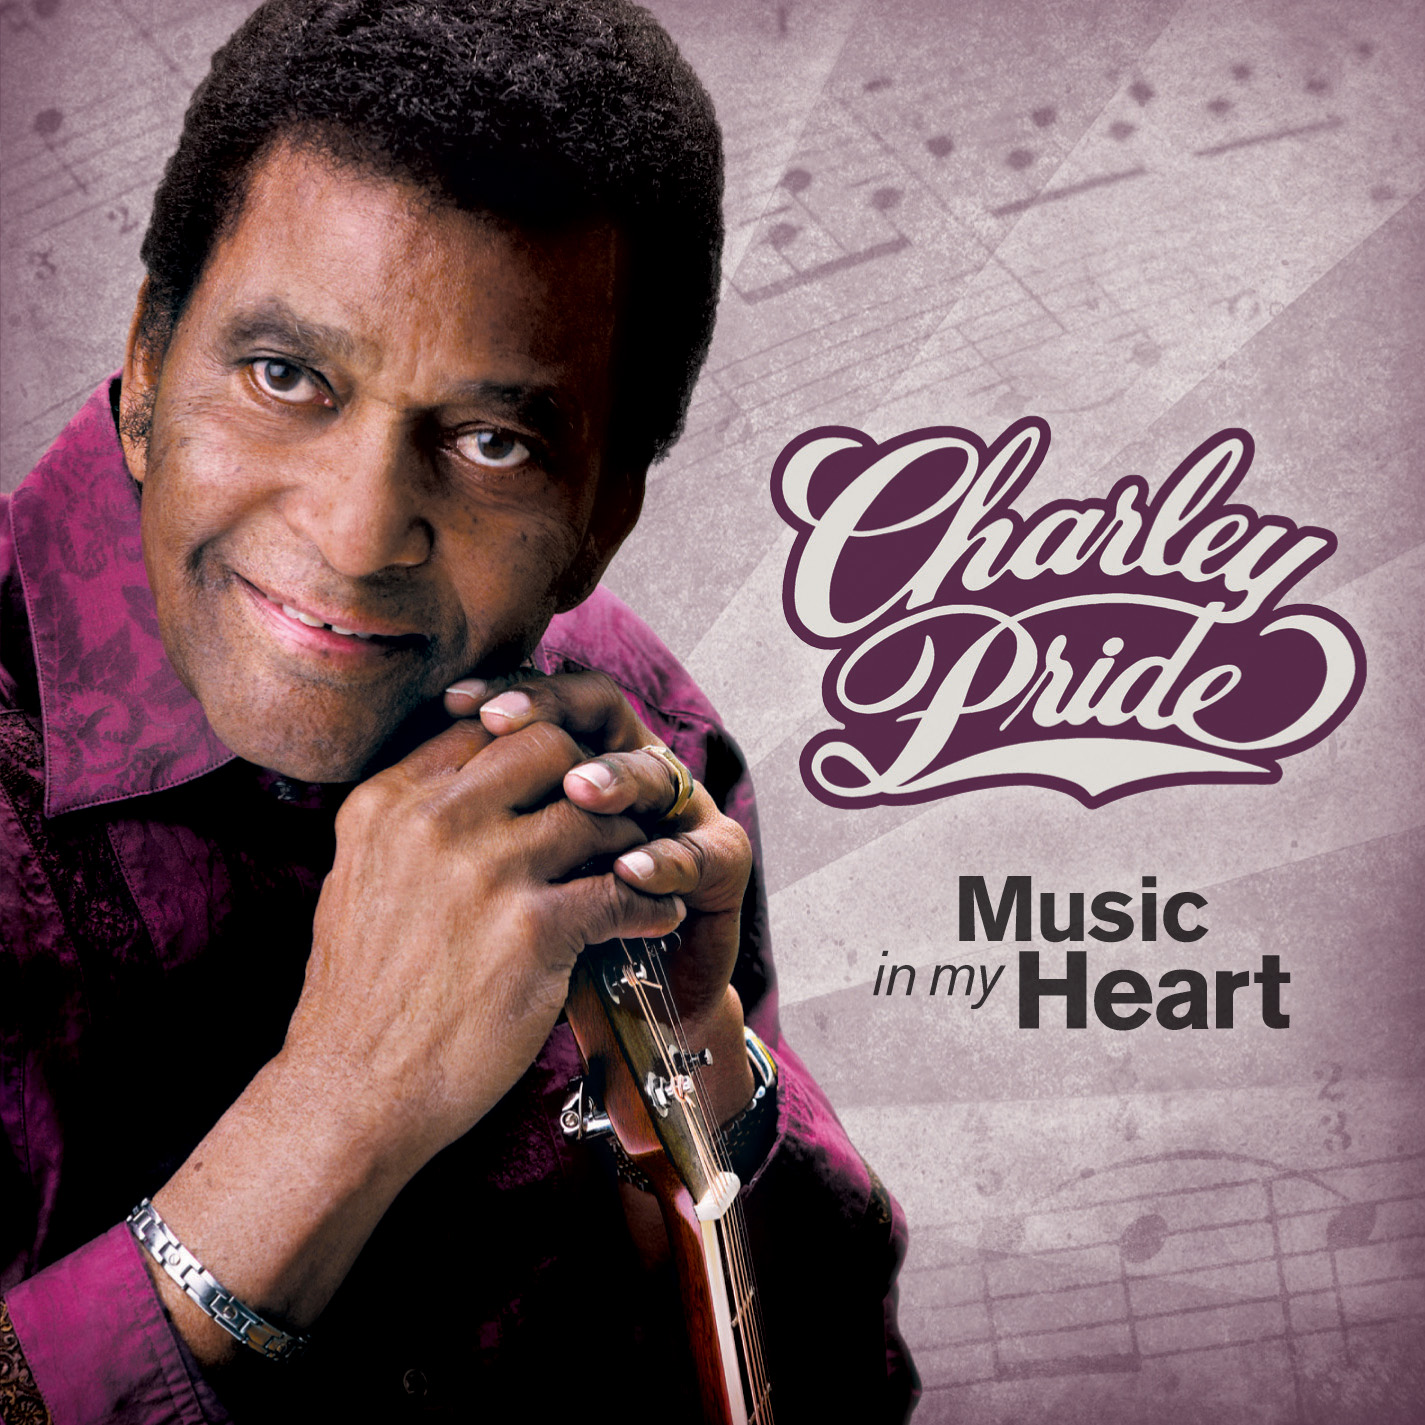 charley pride music in my heart